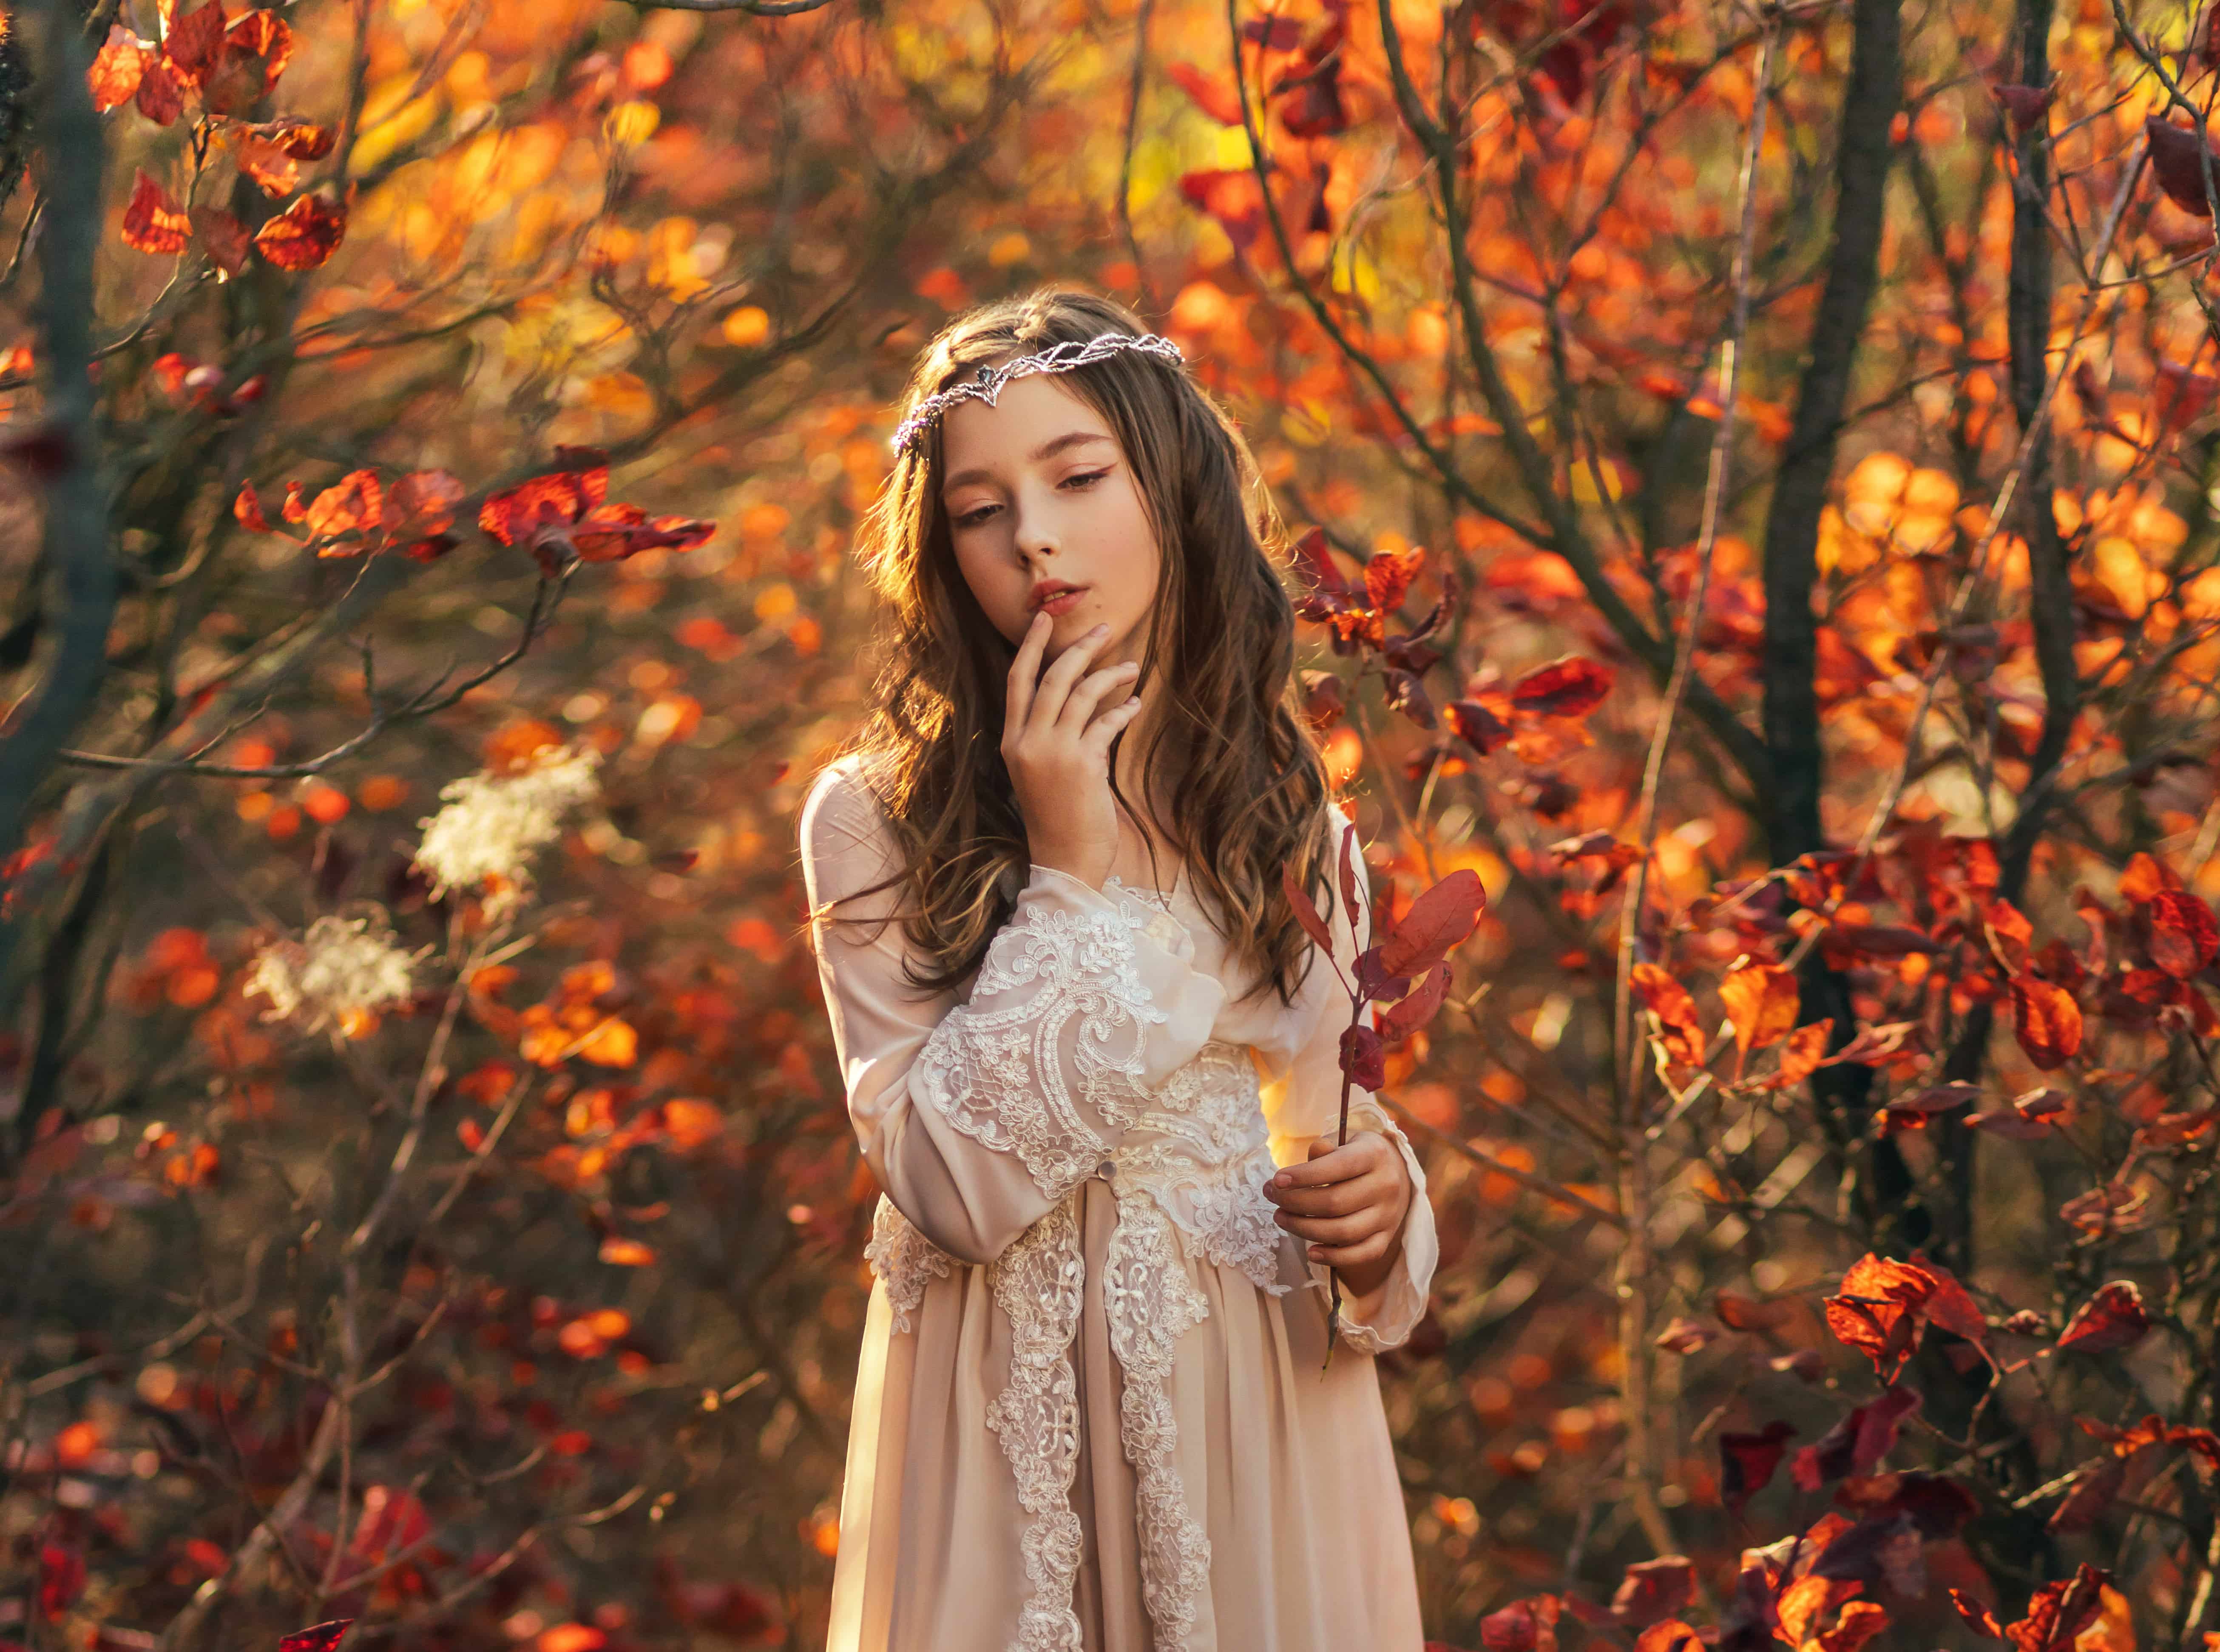 Fantasy portrait teenage princess girl walking in forest, blond flowing hair cute face. White vintage dress, silver crown tiara diadem on head. Autumn nature red orange leaves trees. Elf nymph woman